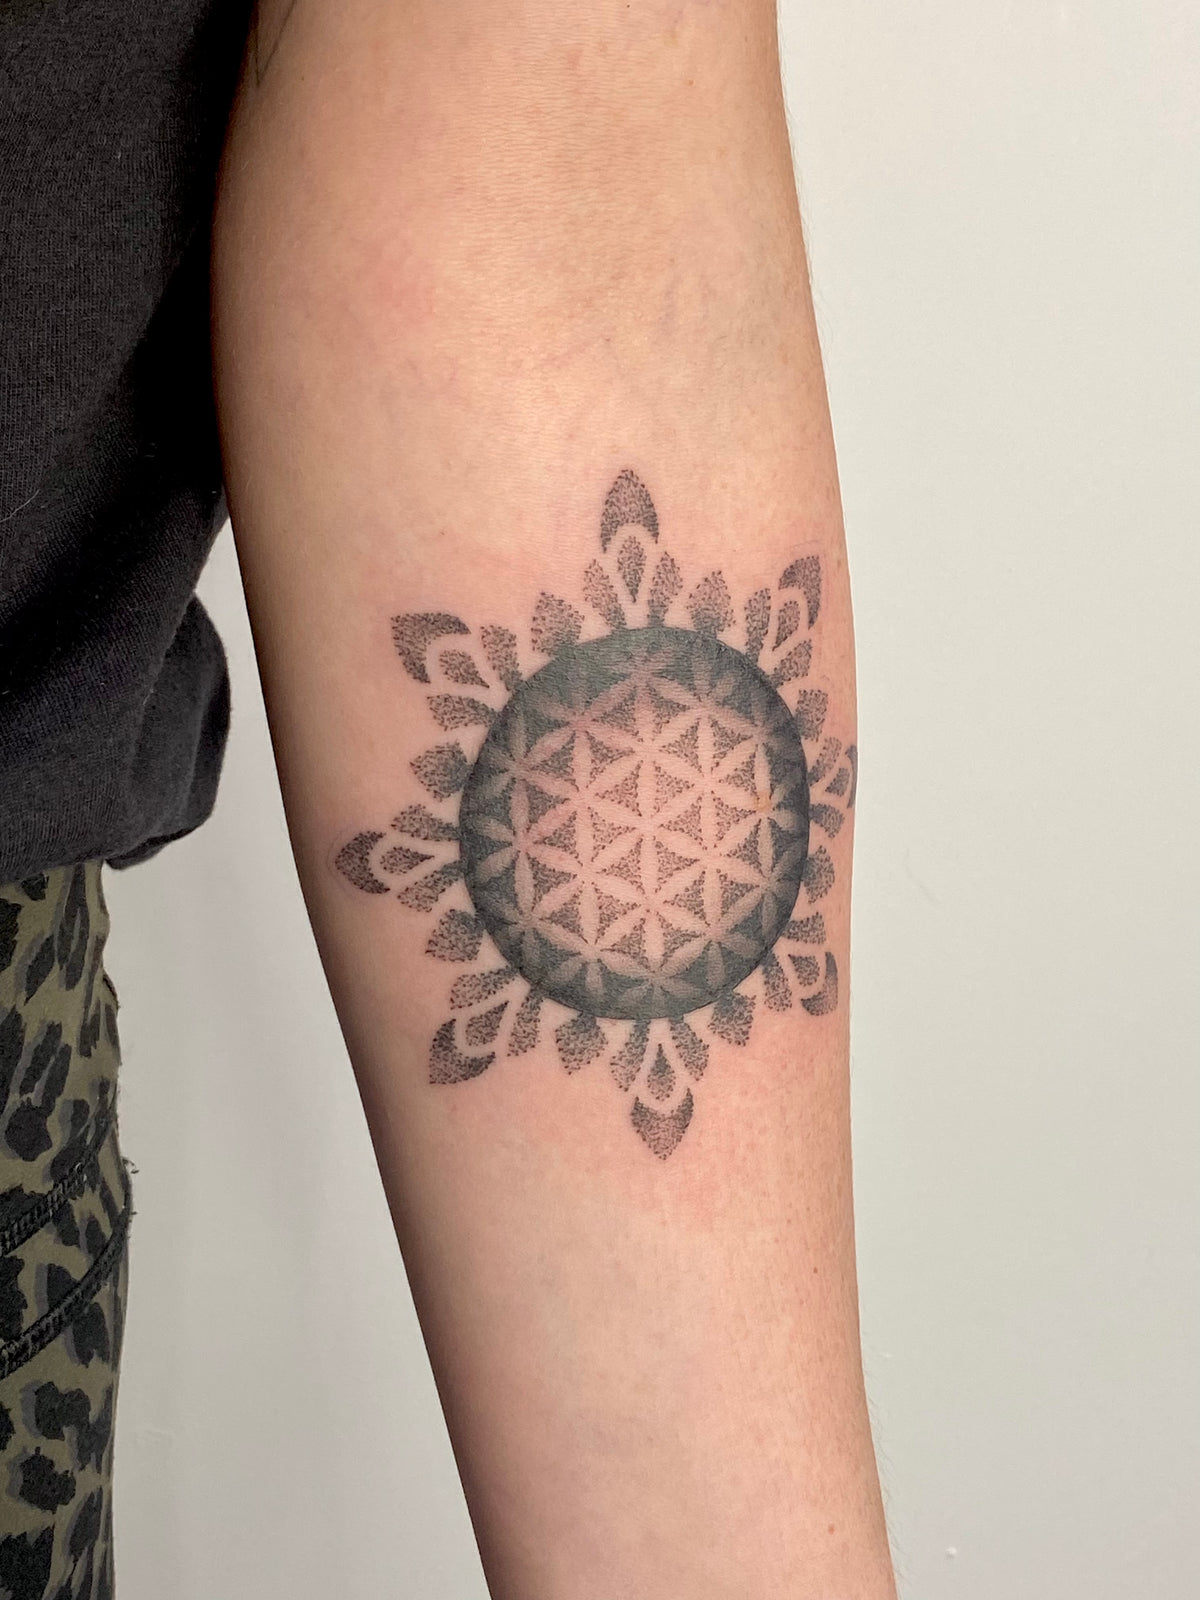 The Meaning of Mandala Tattoos